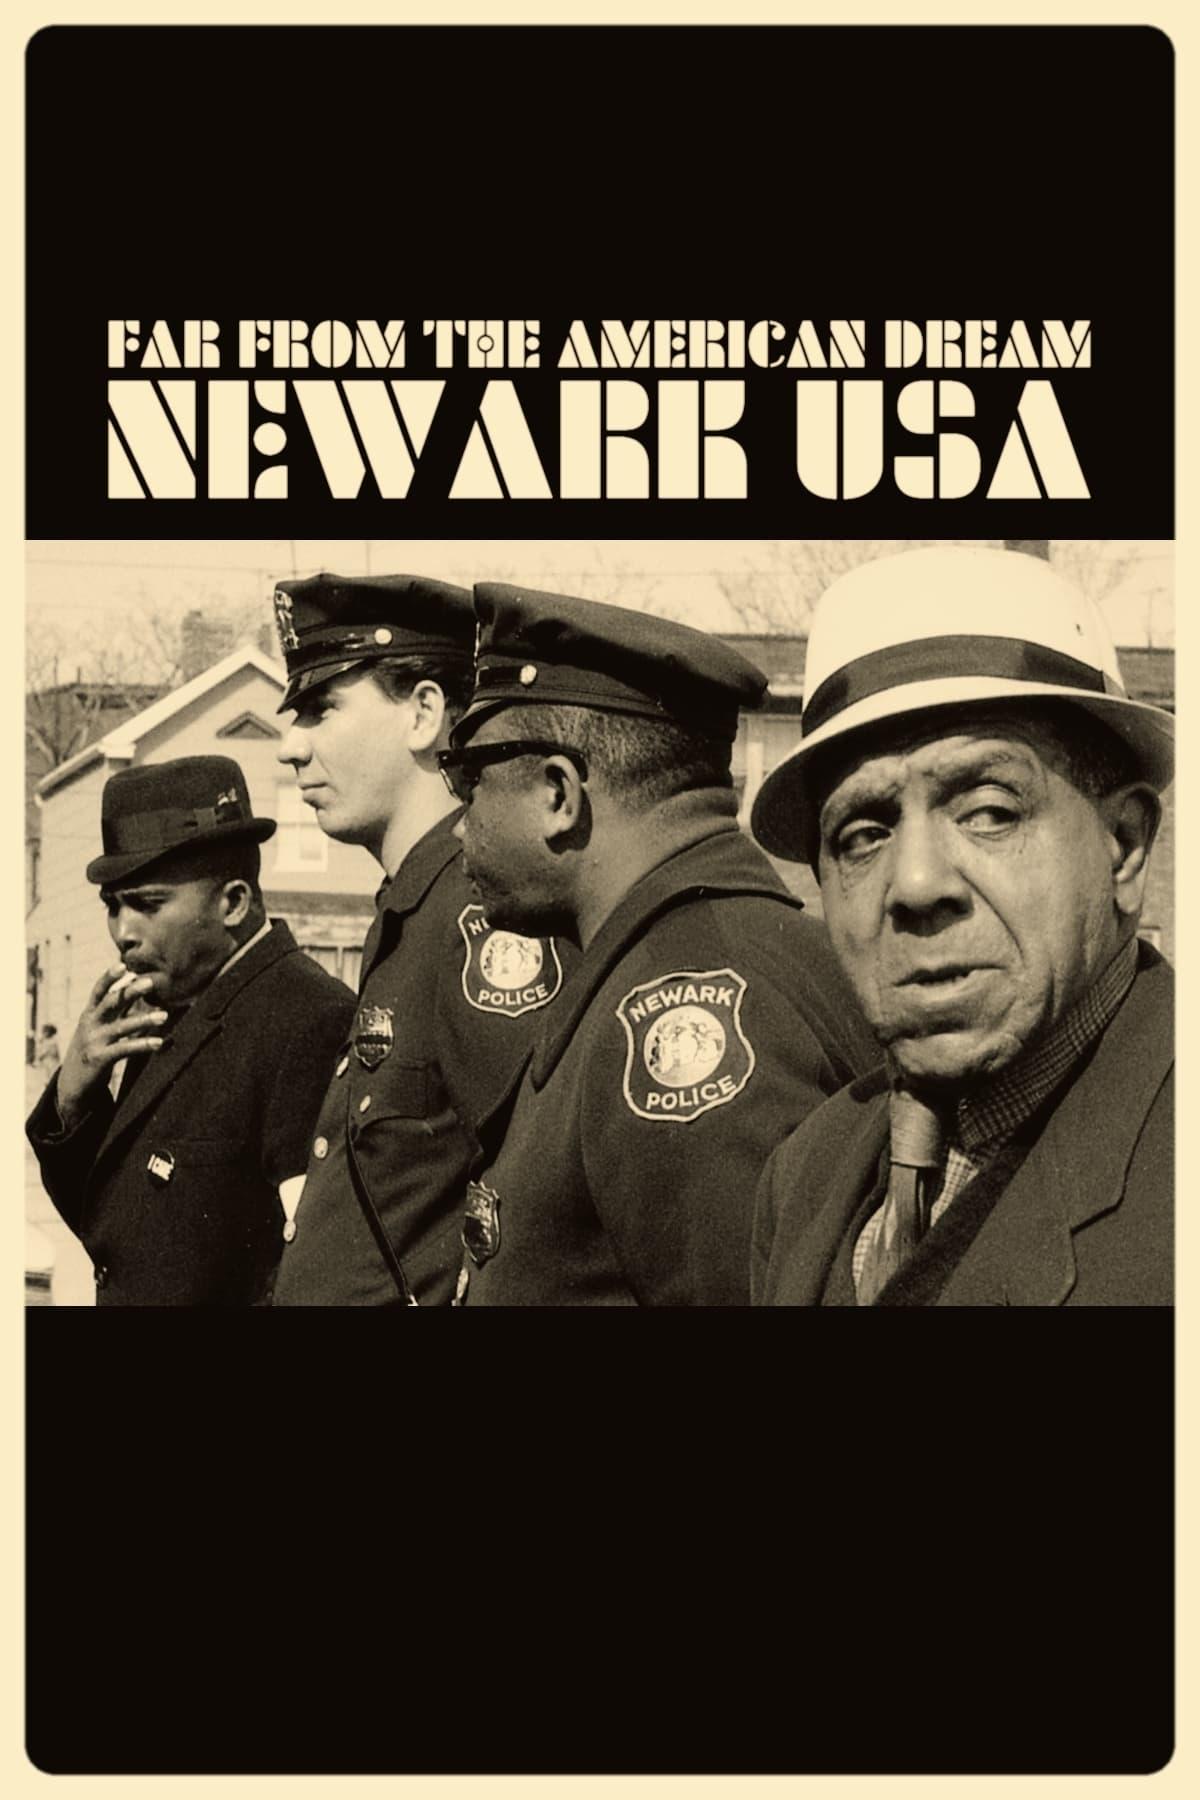 Newark USA: Far from the American Dream poster